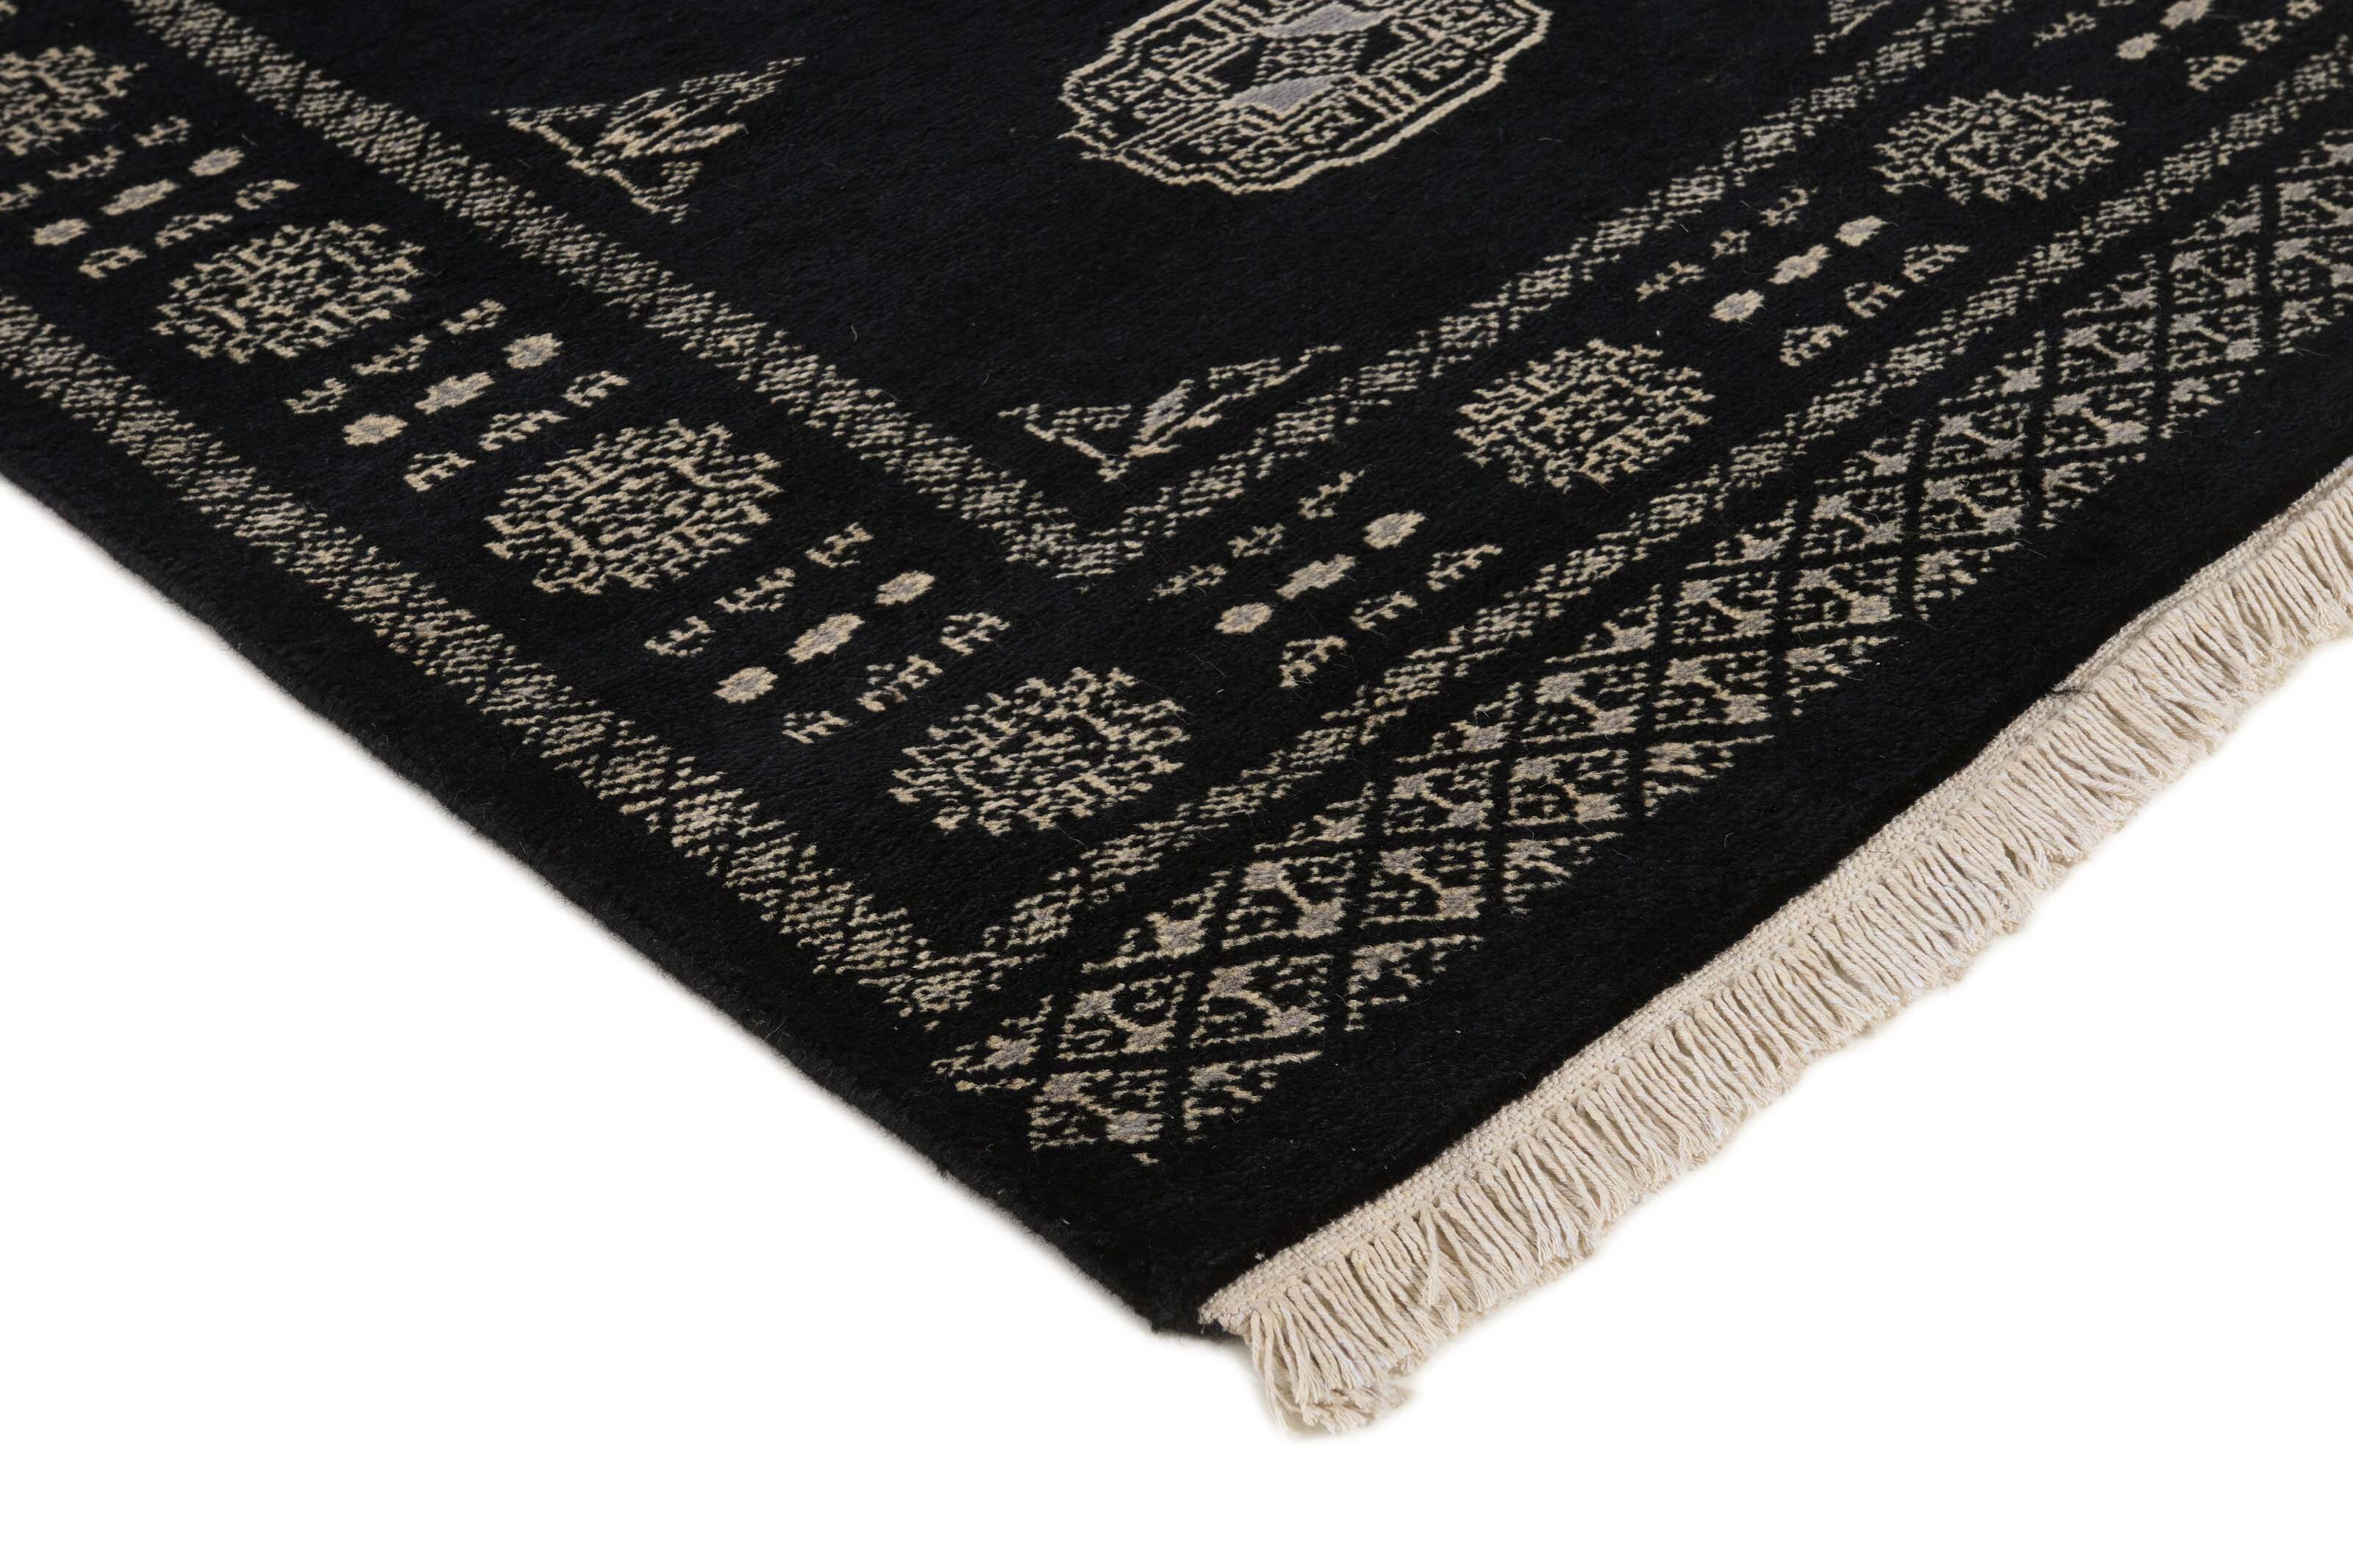 Black Oriental Bokhara 2 ply runner rug with bordered pattern